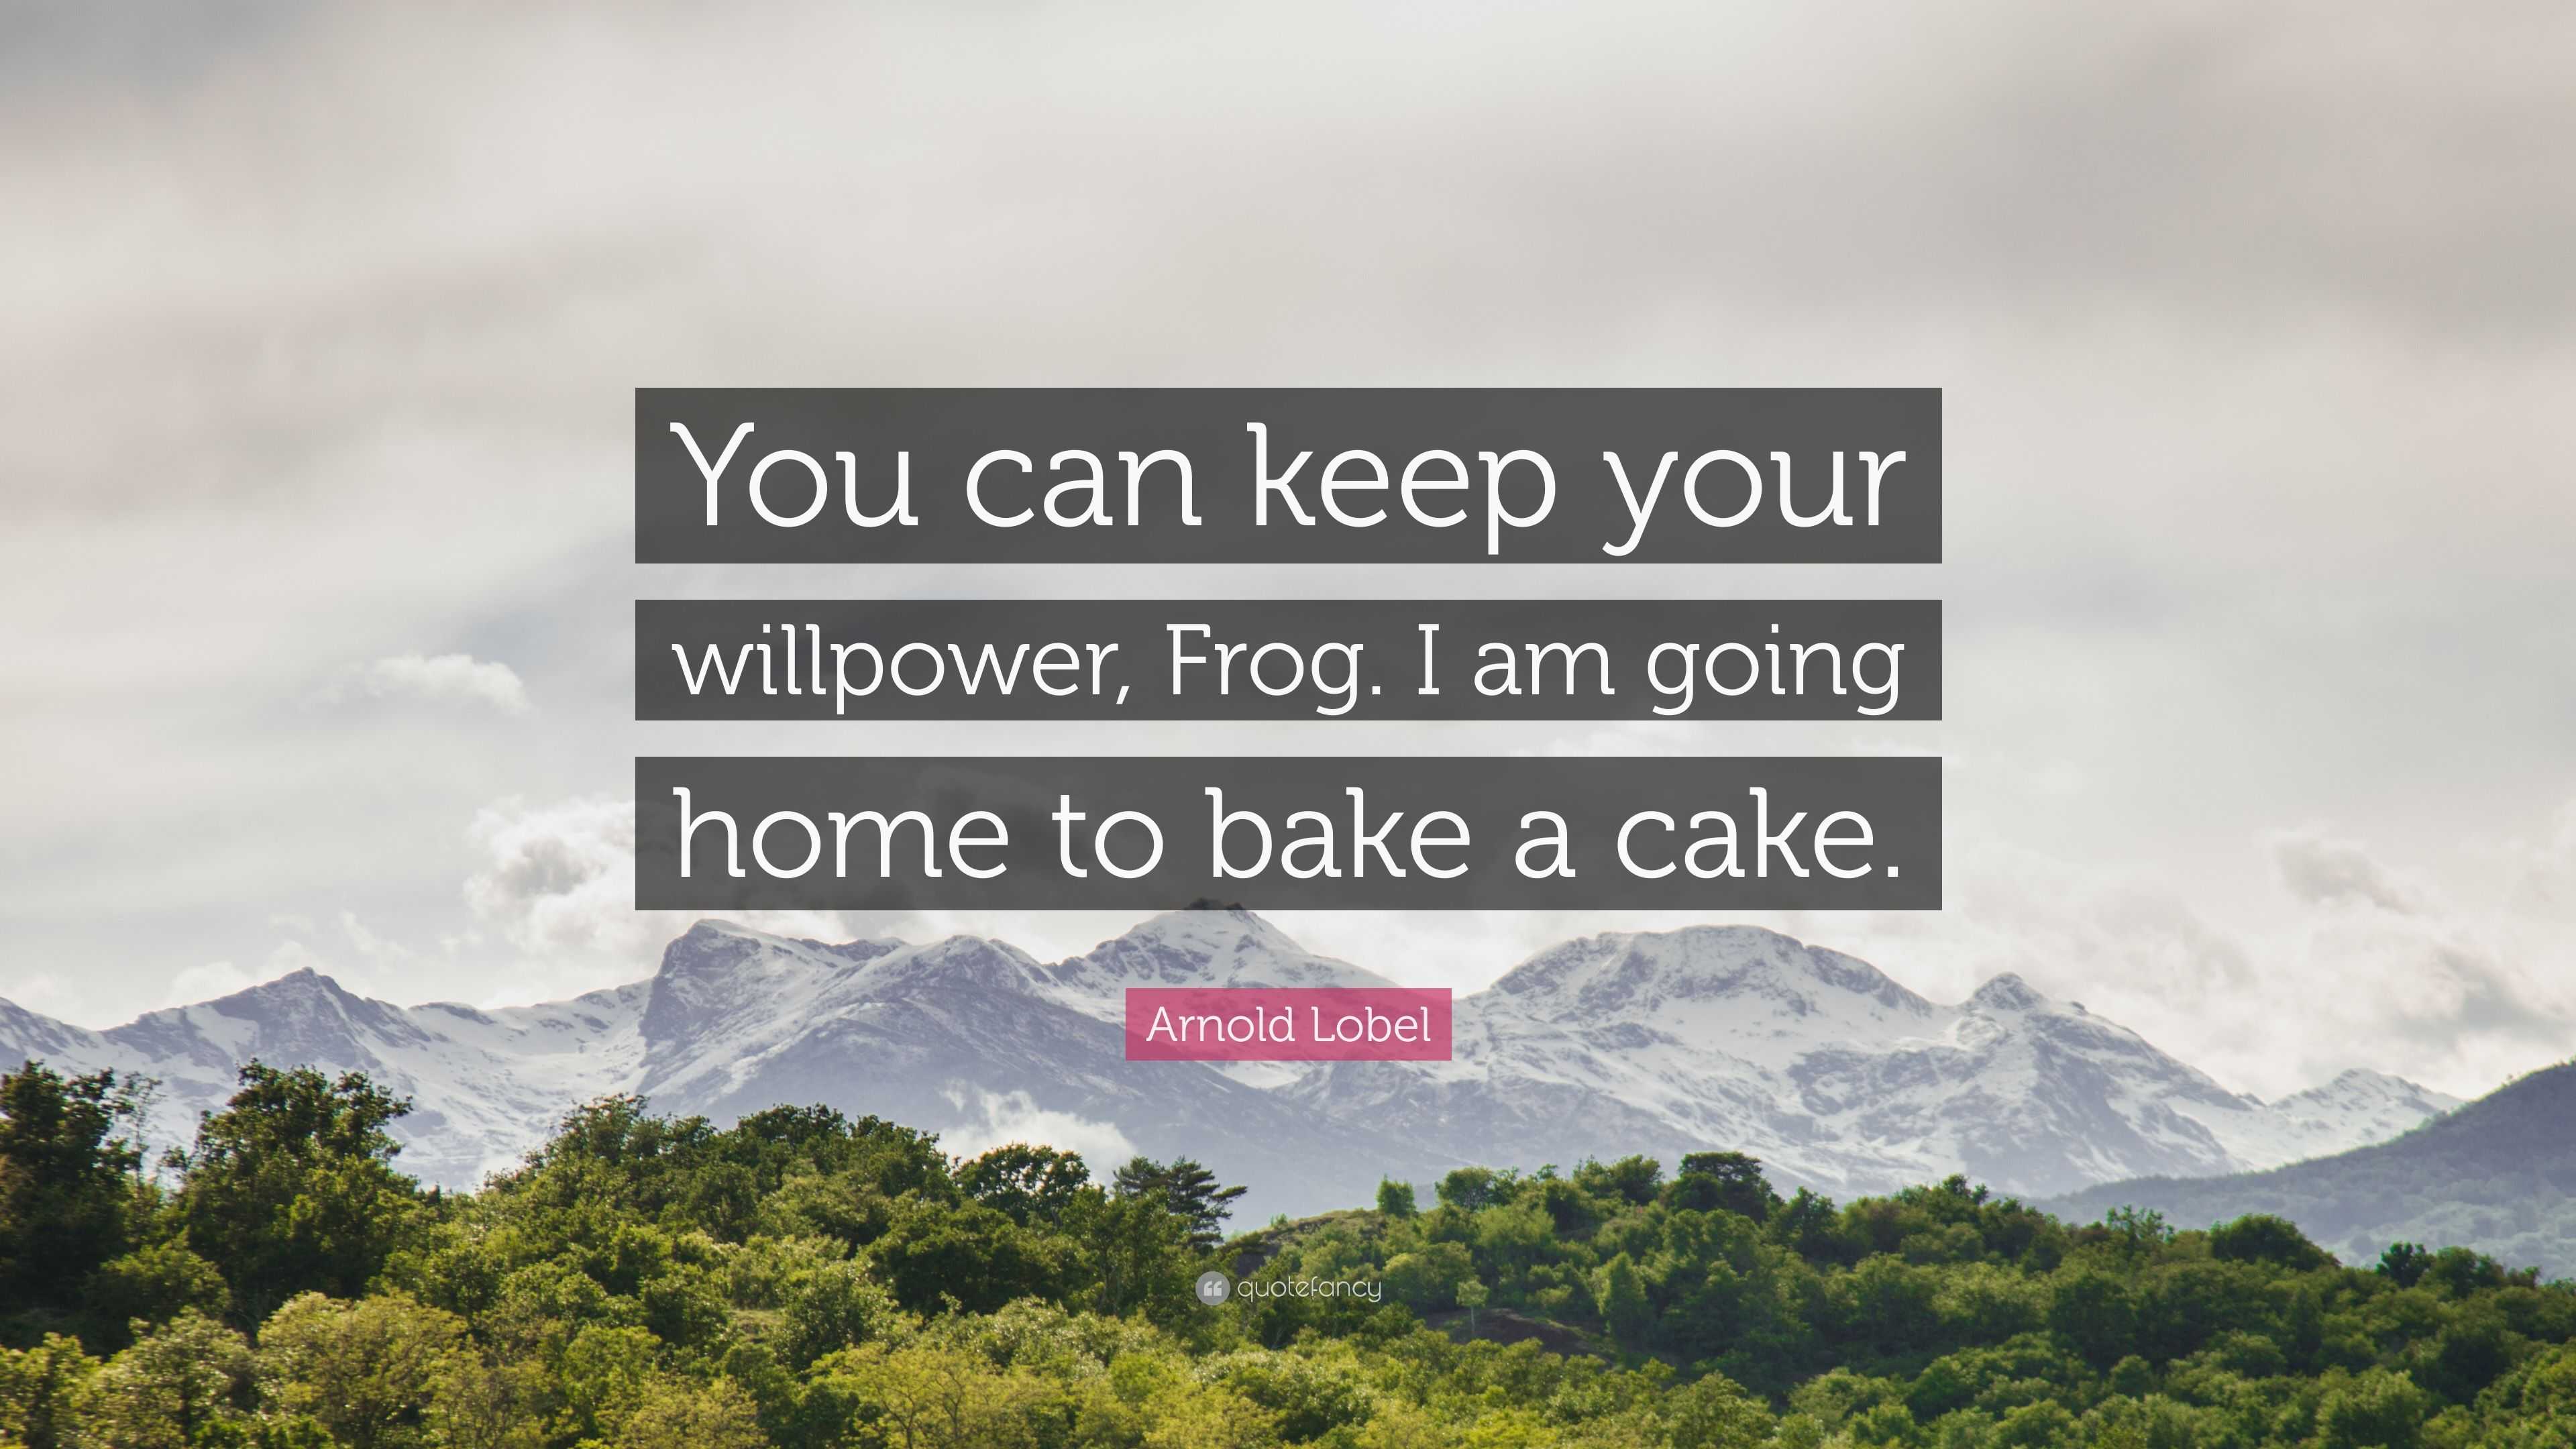 101 Fun Cake Quotes for Bakers | Cake quotes, Baking quotes funny, Baking  quotes